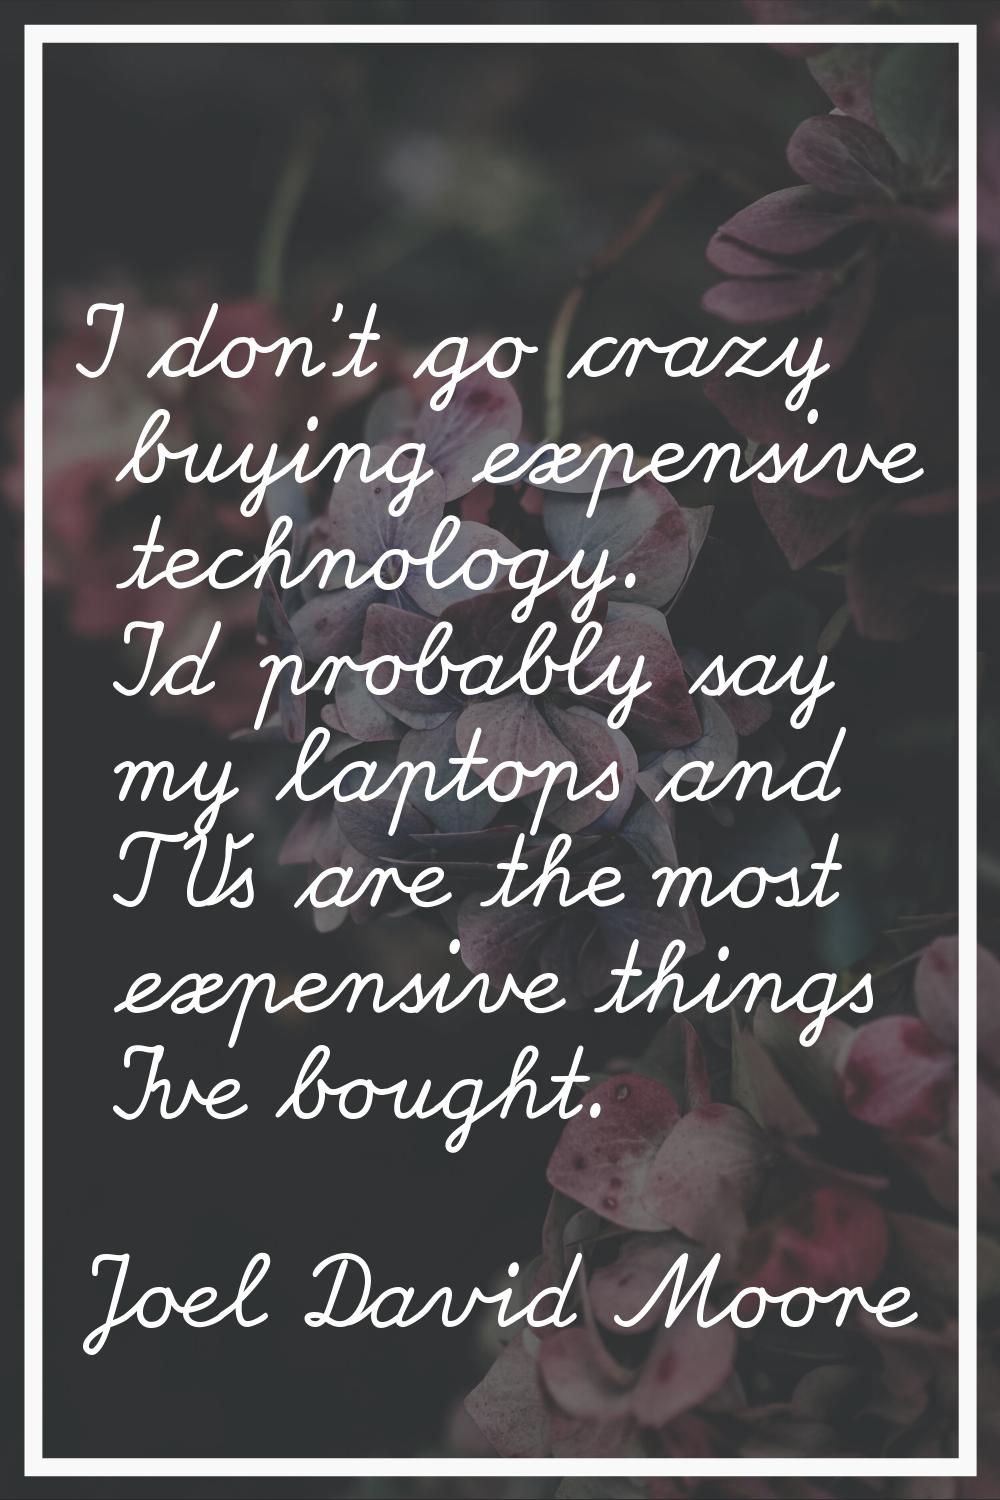 I don't go crazy buying expensive technology. I'd probably say my laptops and TVs are the most expe